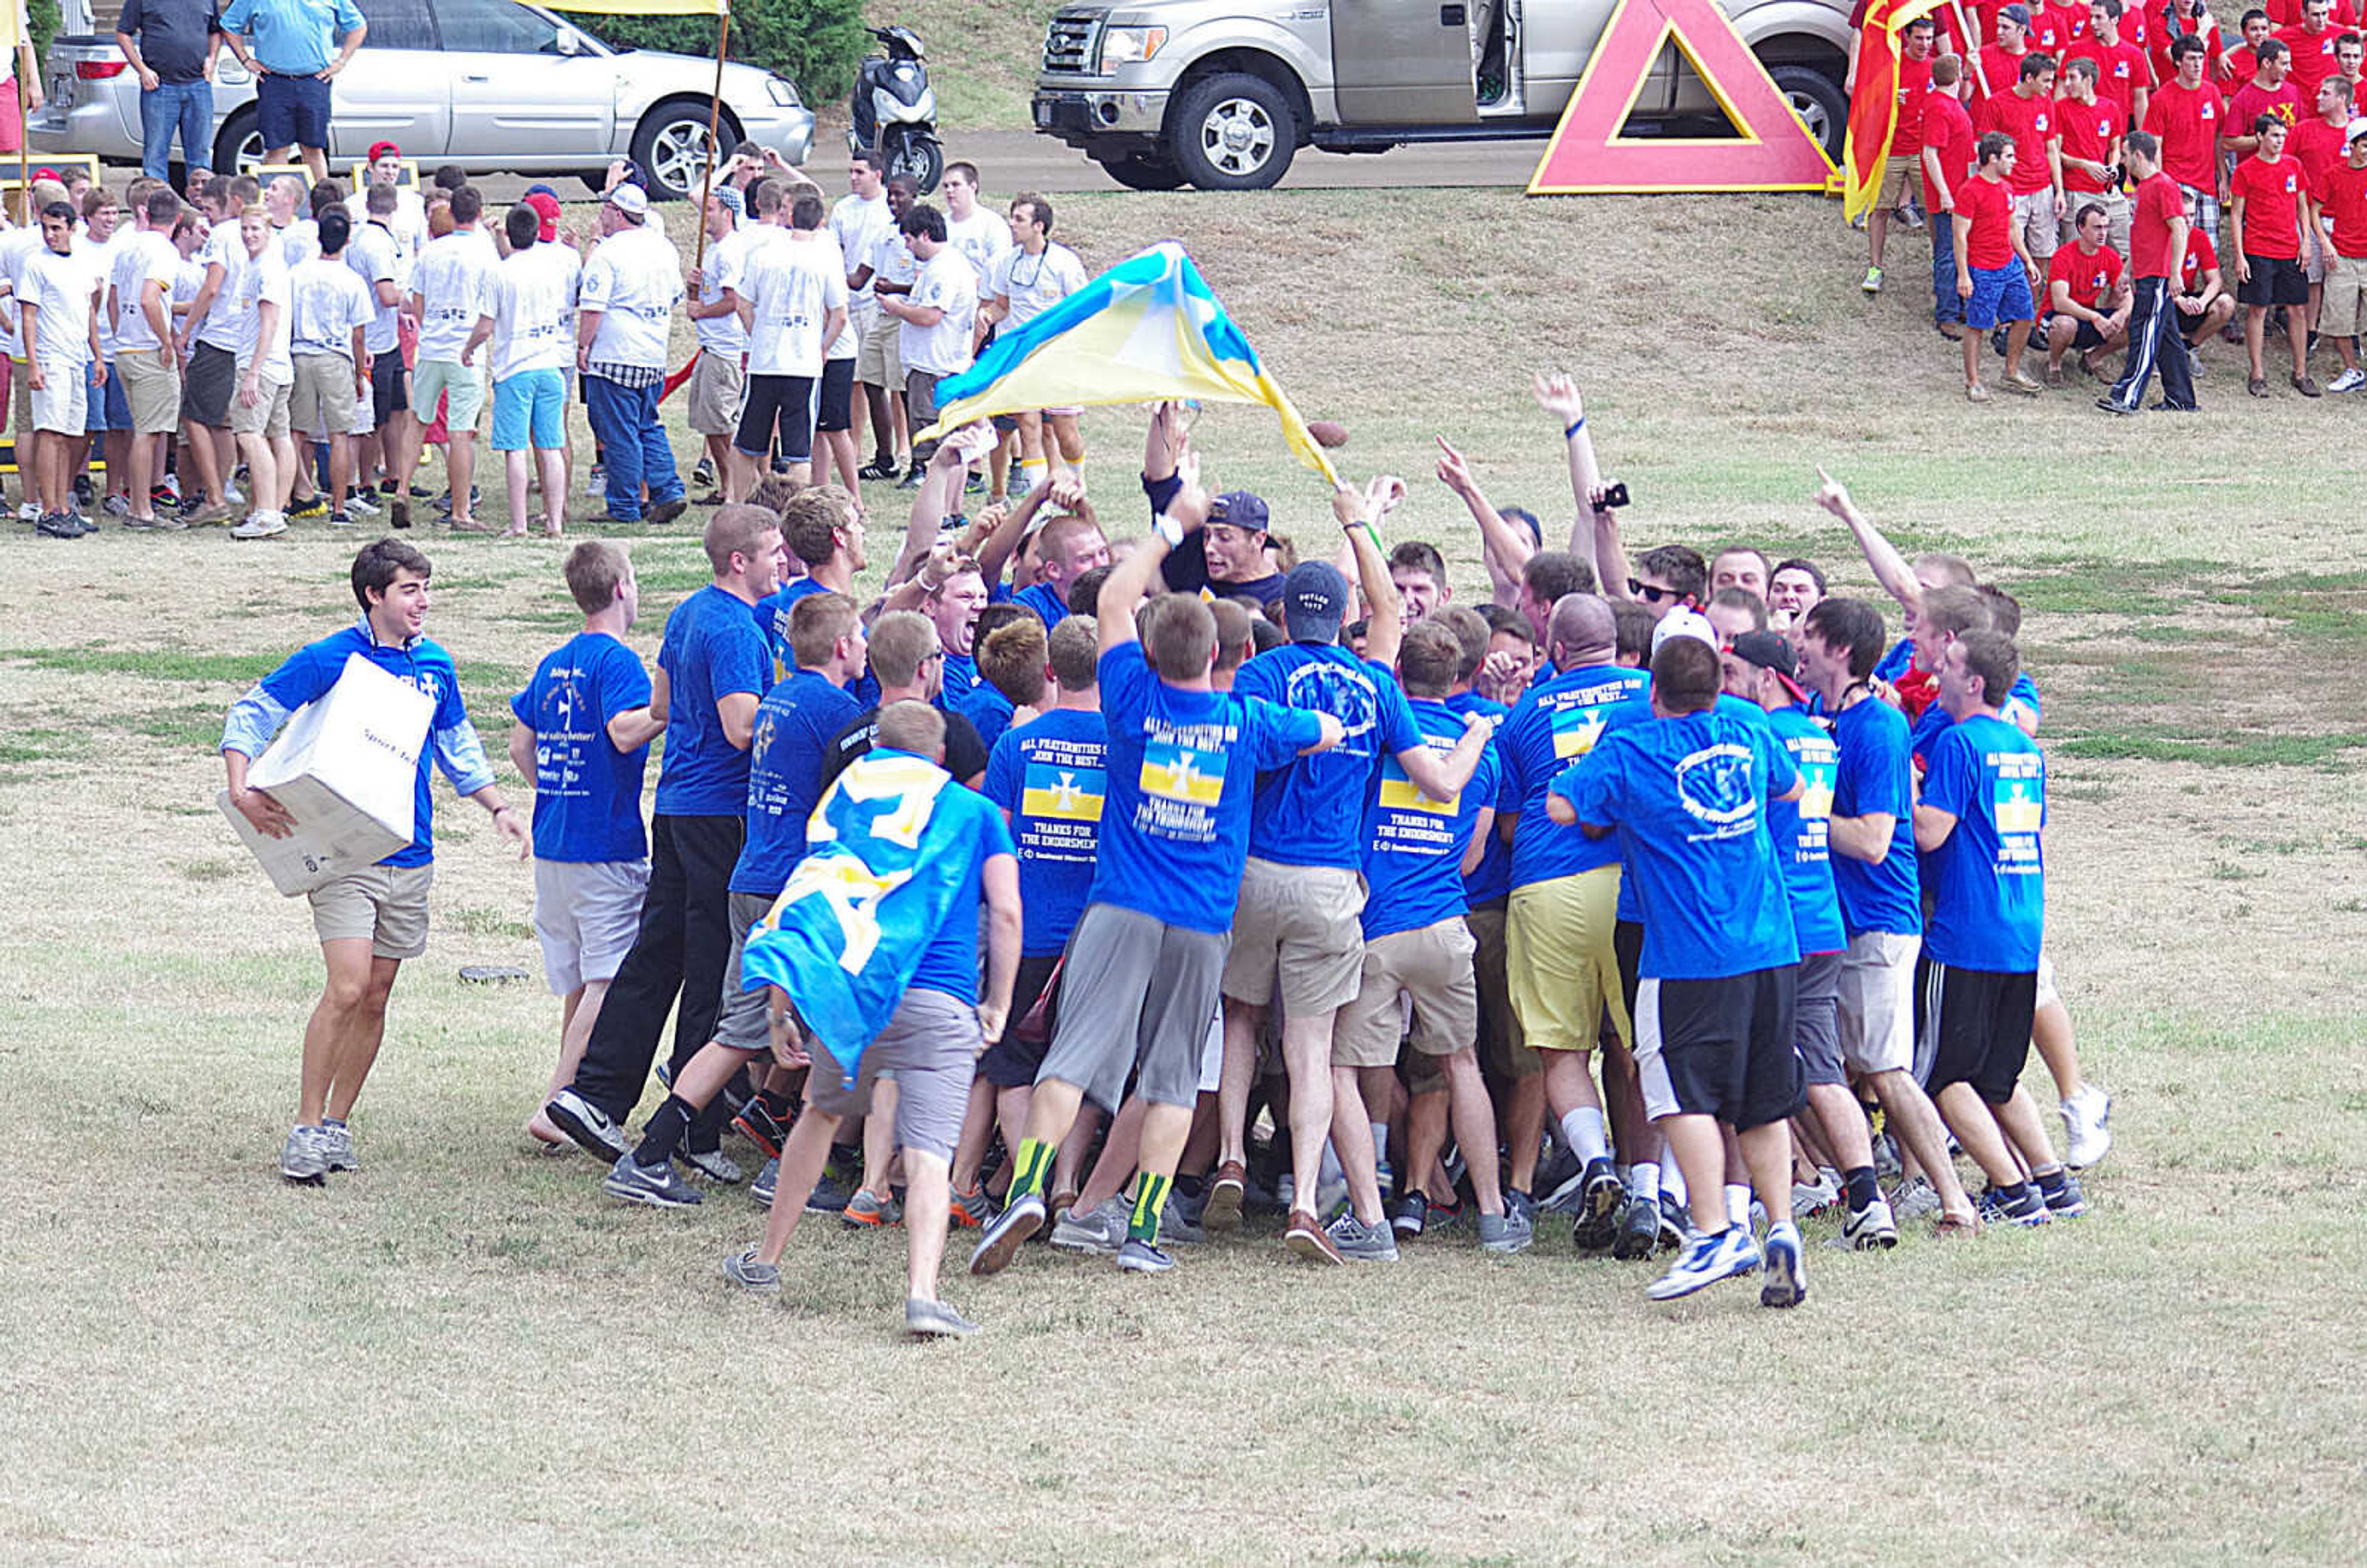 A fraternity jumps and cheers as they embrace their new brothers at Bid Day. Photo by Nathan Hamilton